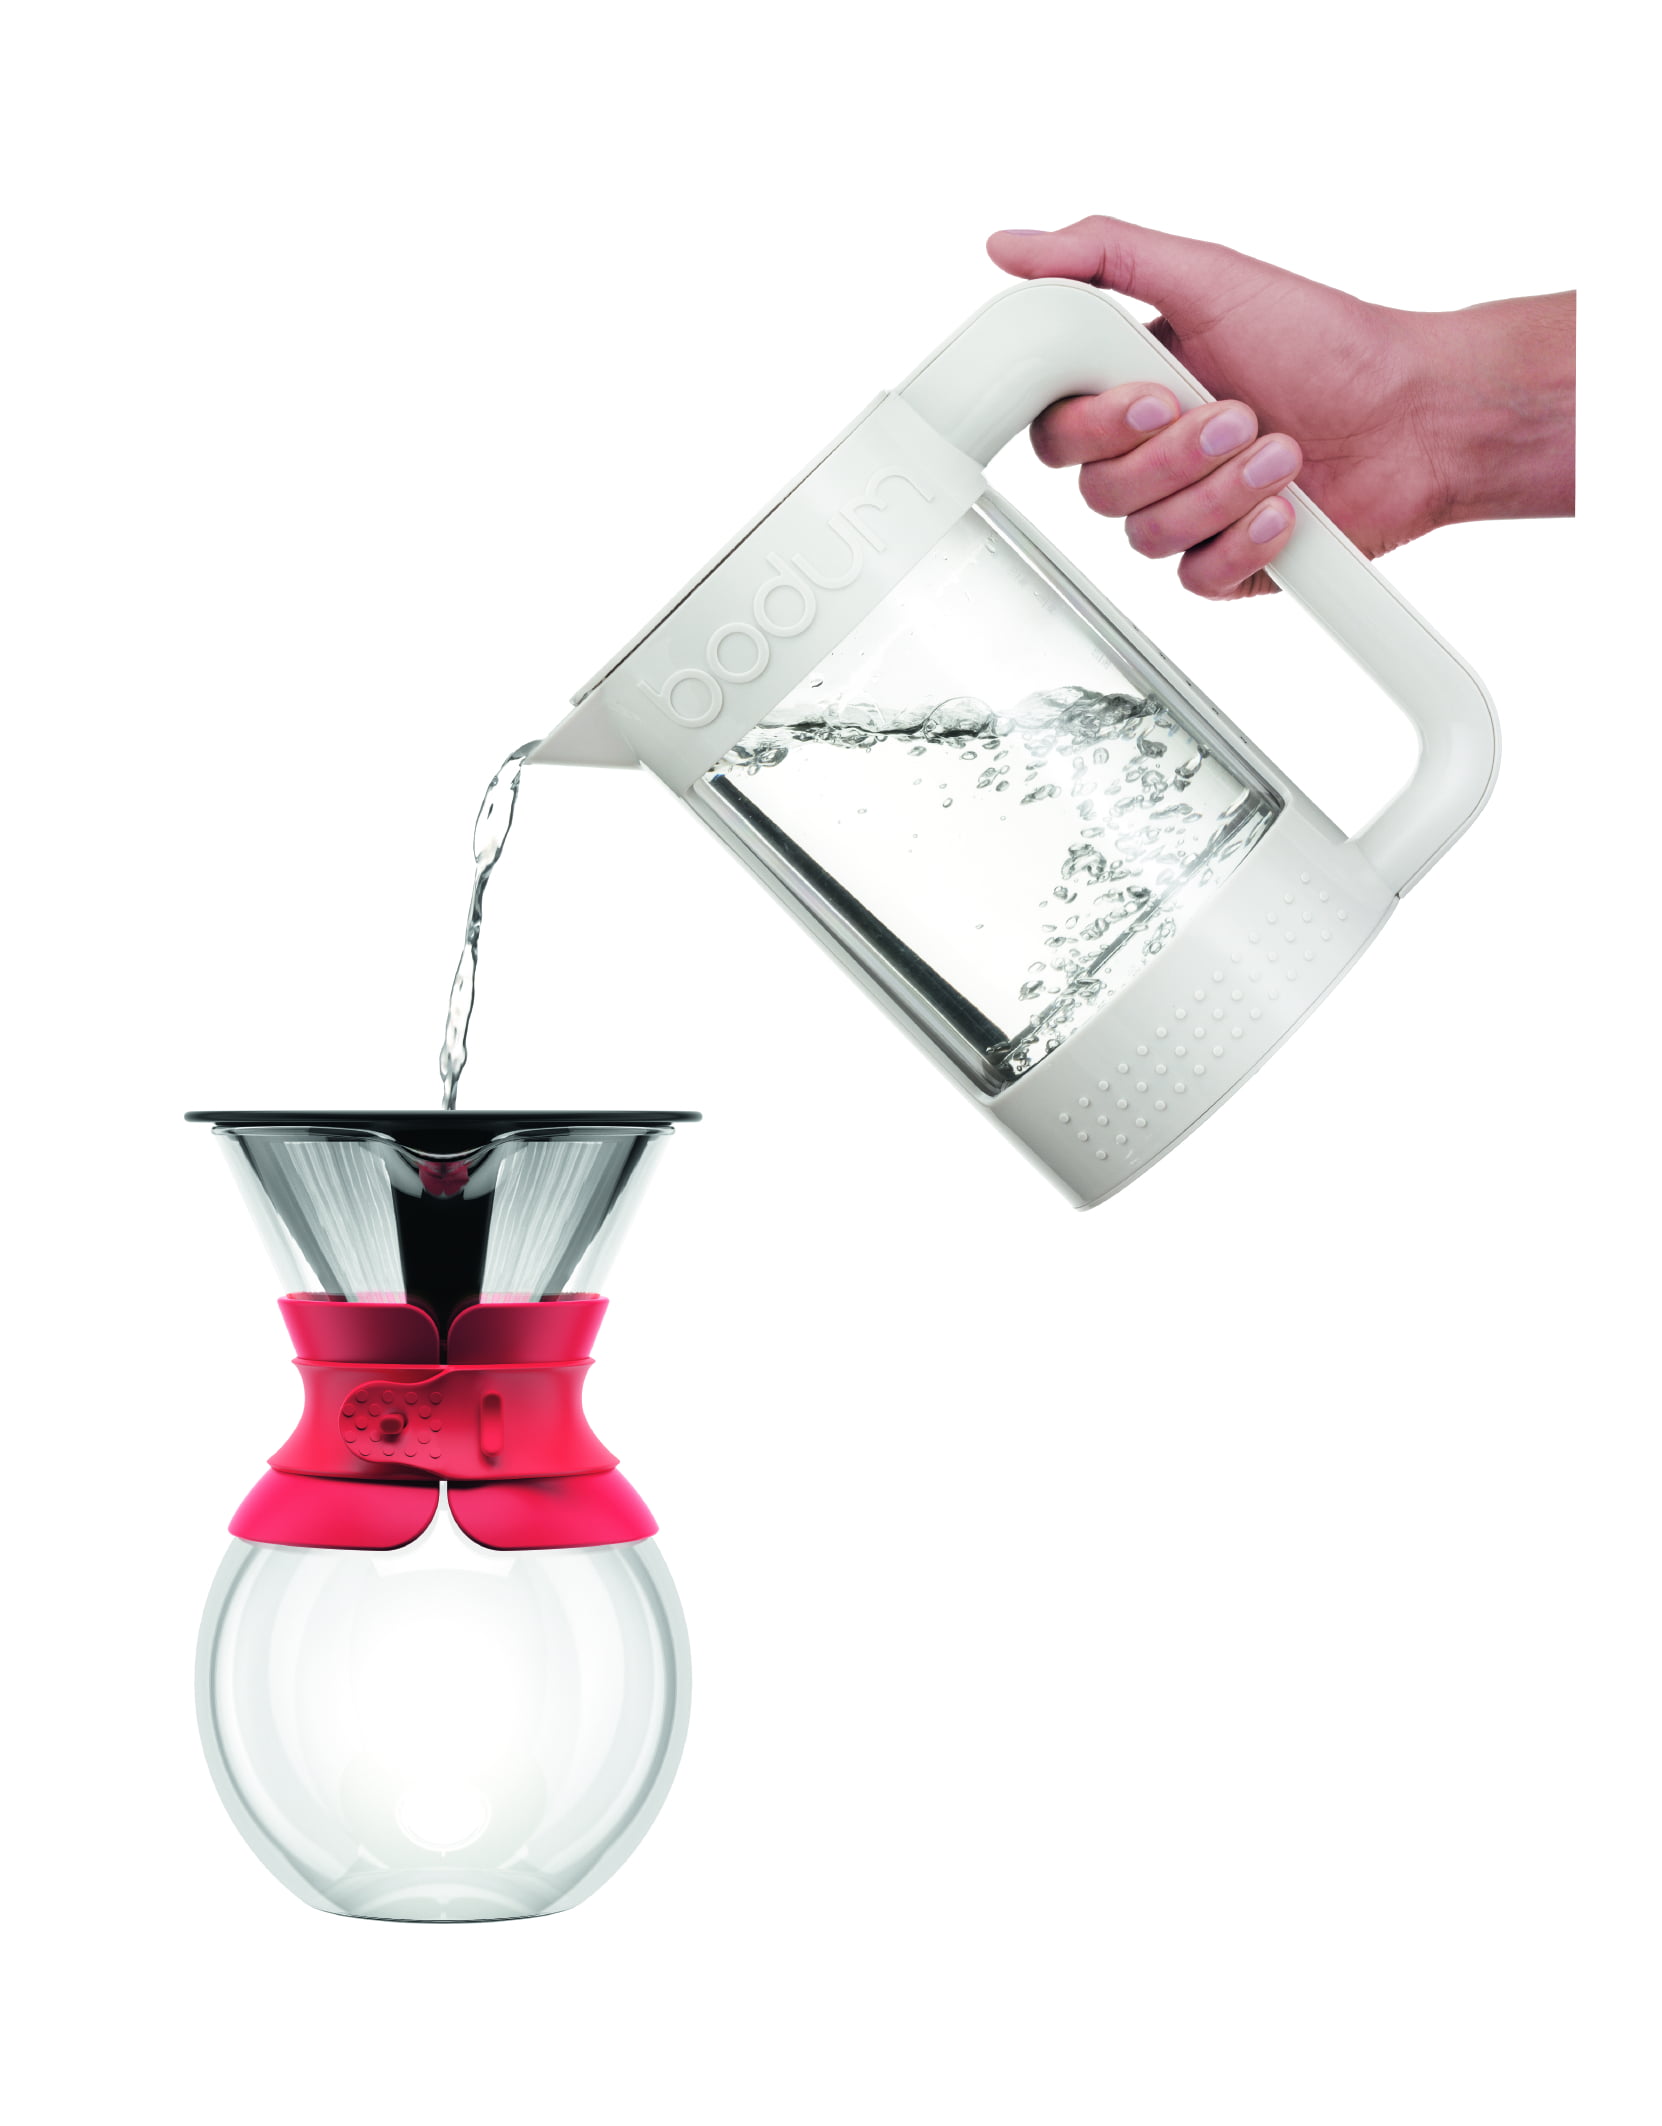 34 oz Bodum 11571-294 Pour Over Coffee Maker with Permanent Filter Red